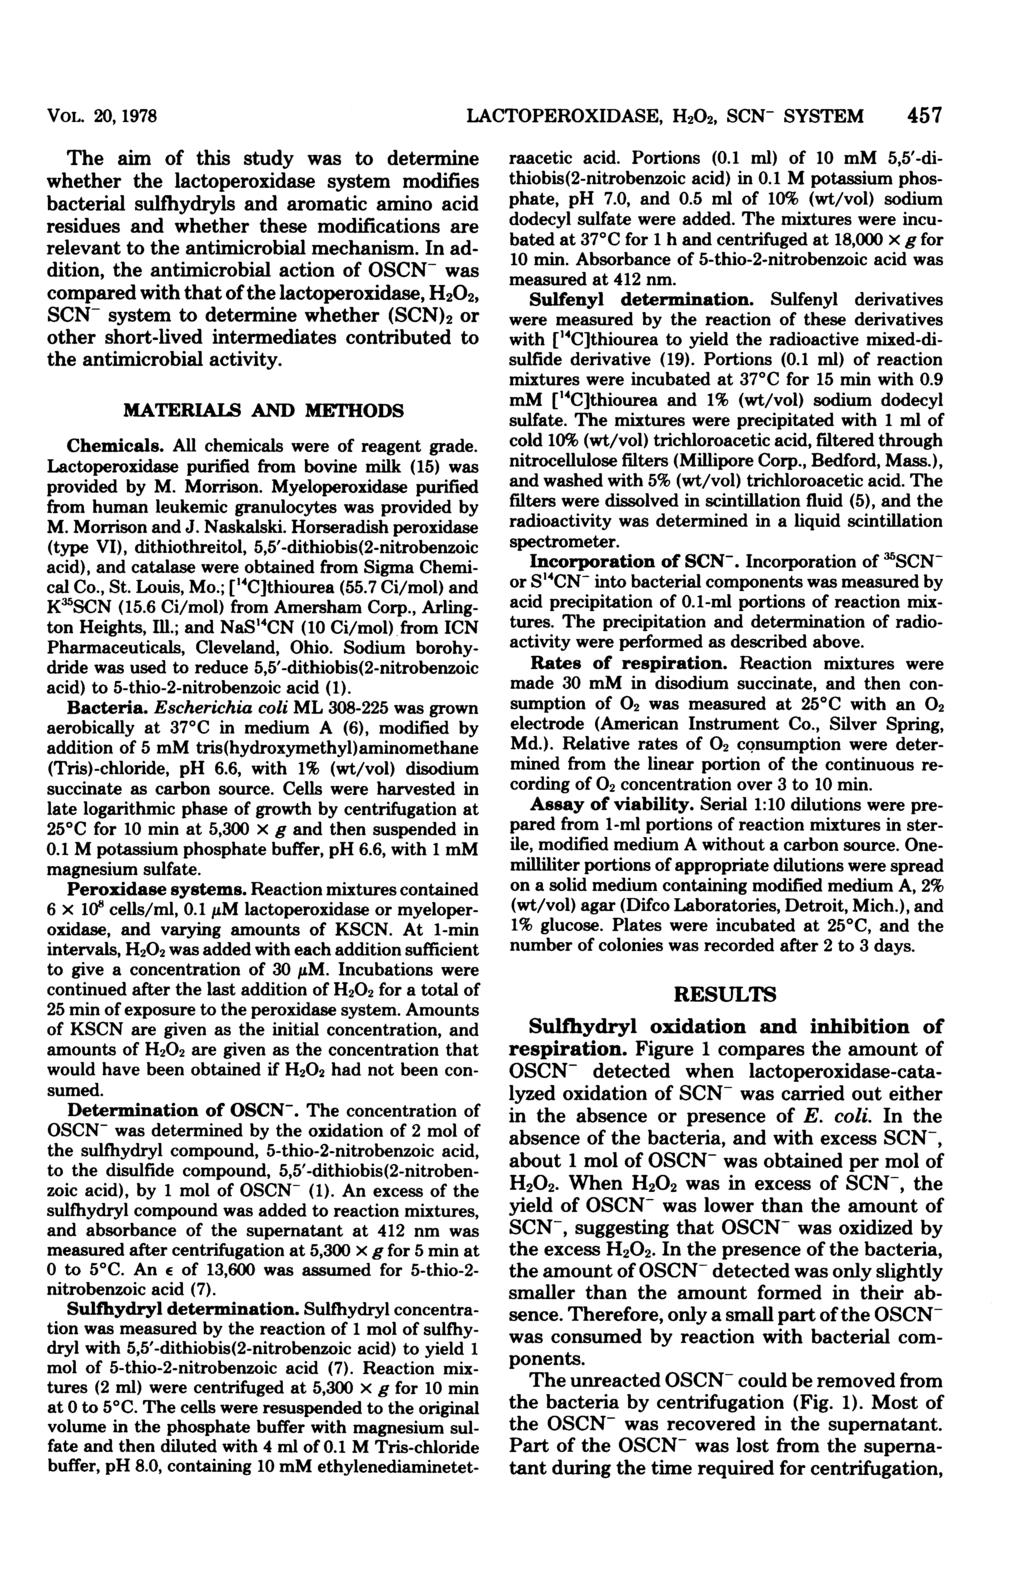 VOL. 2, 1978 The aim of this study was to determine whether the lactoperoxidase system modifies bacterial sulfhiydryls and aromatic amino acid residues and whether these modifications are relevant to